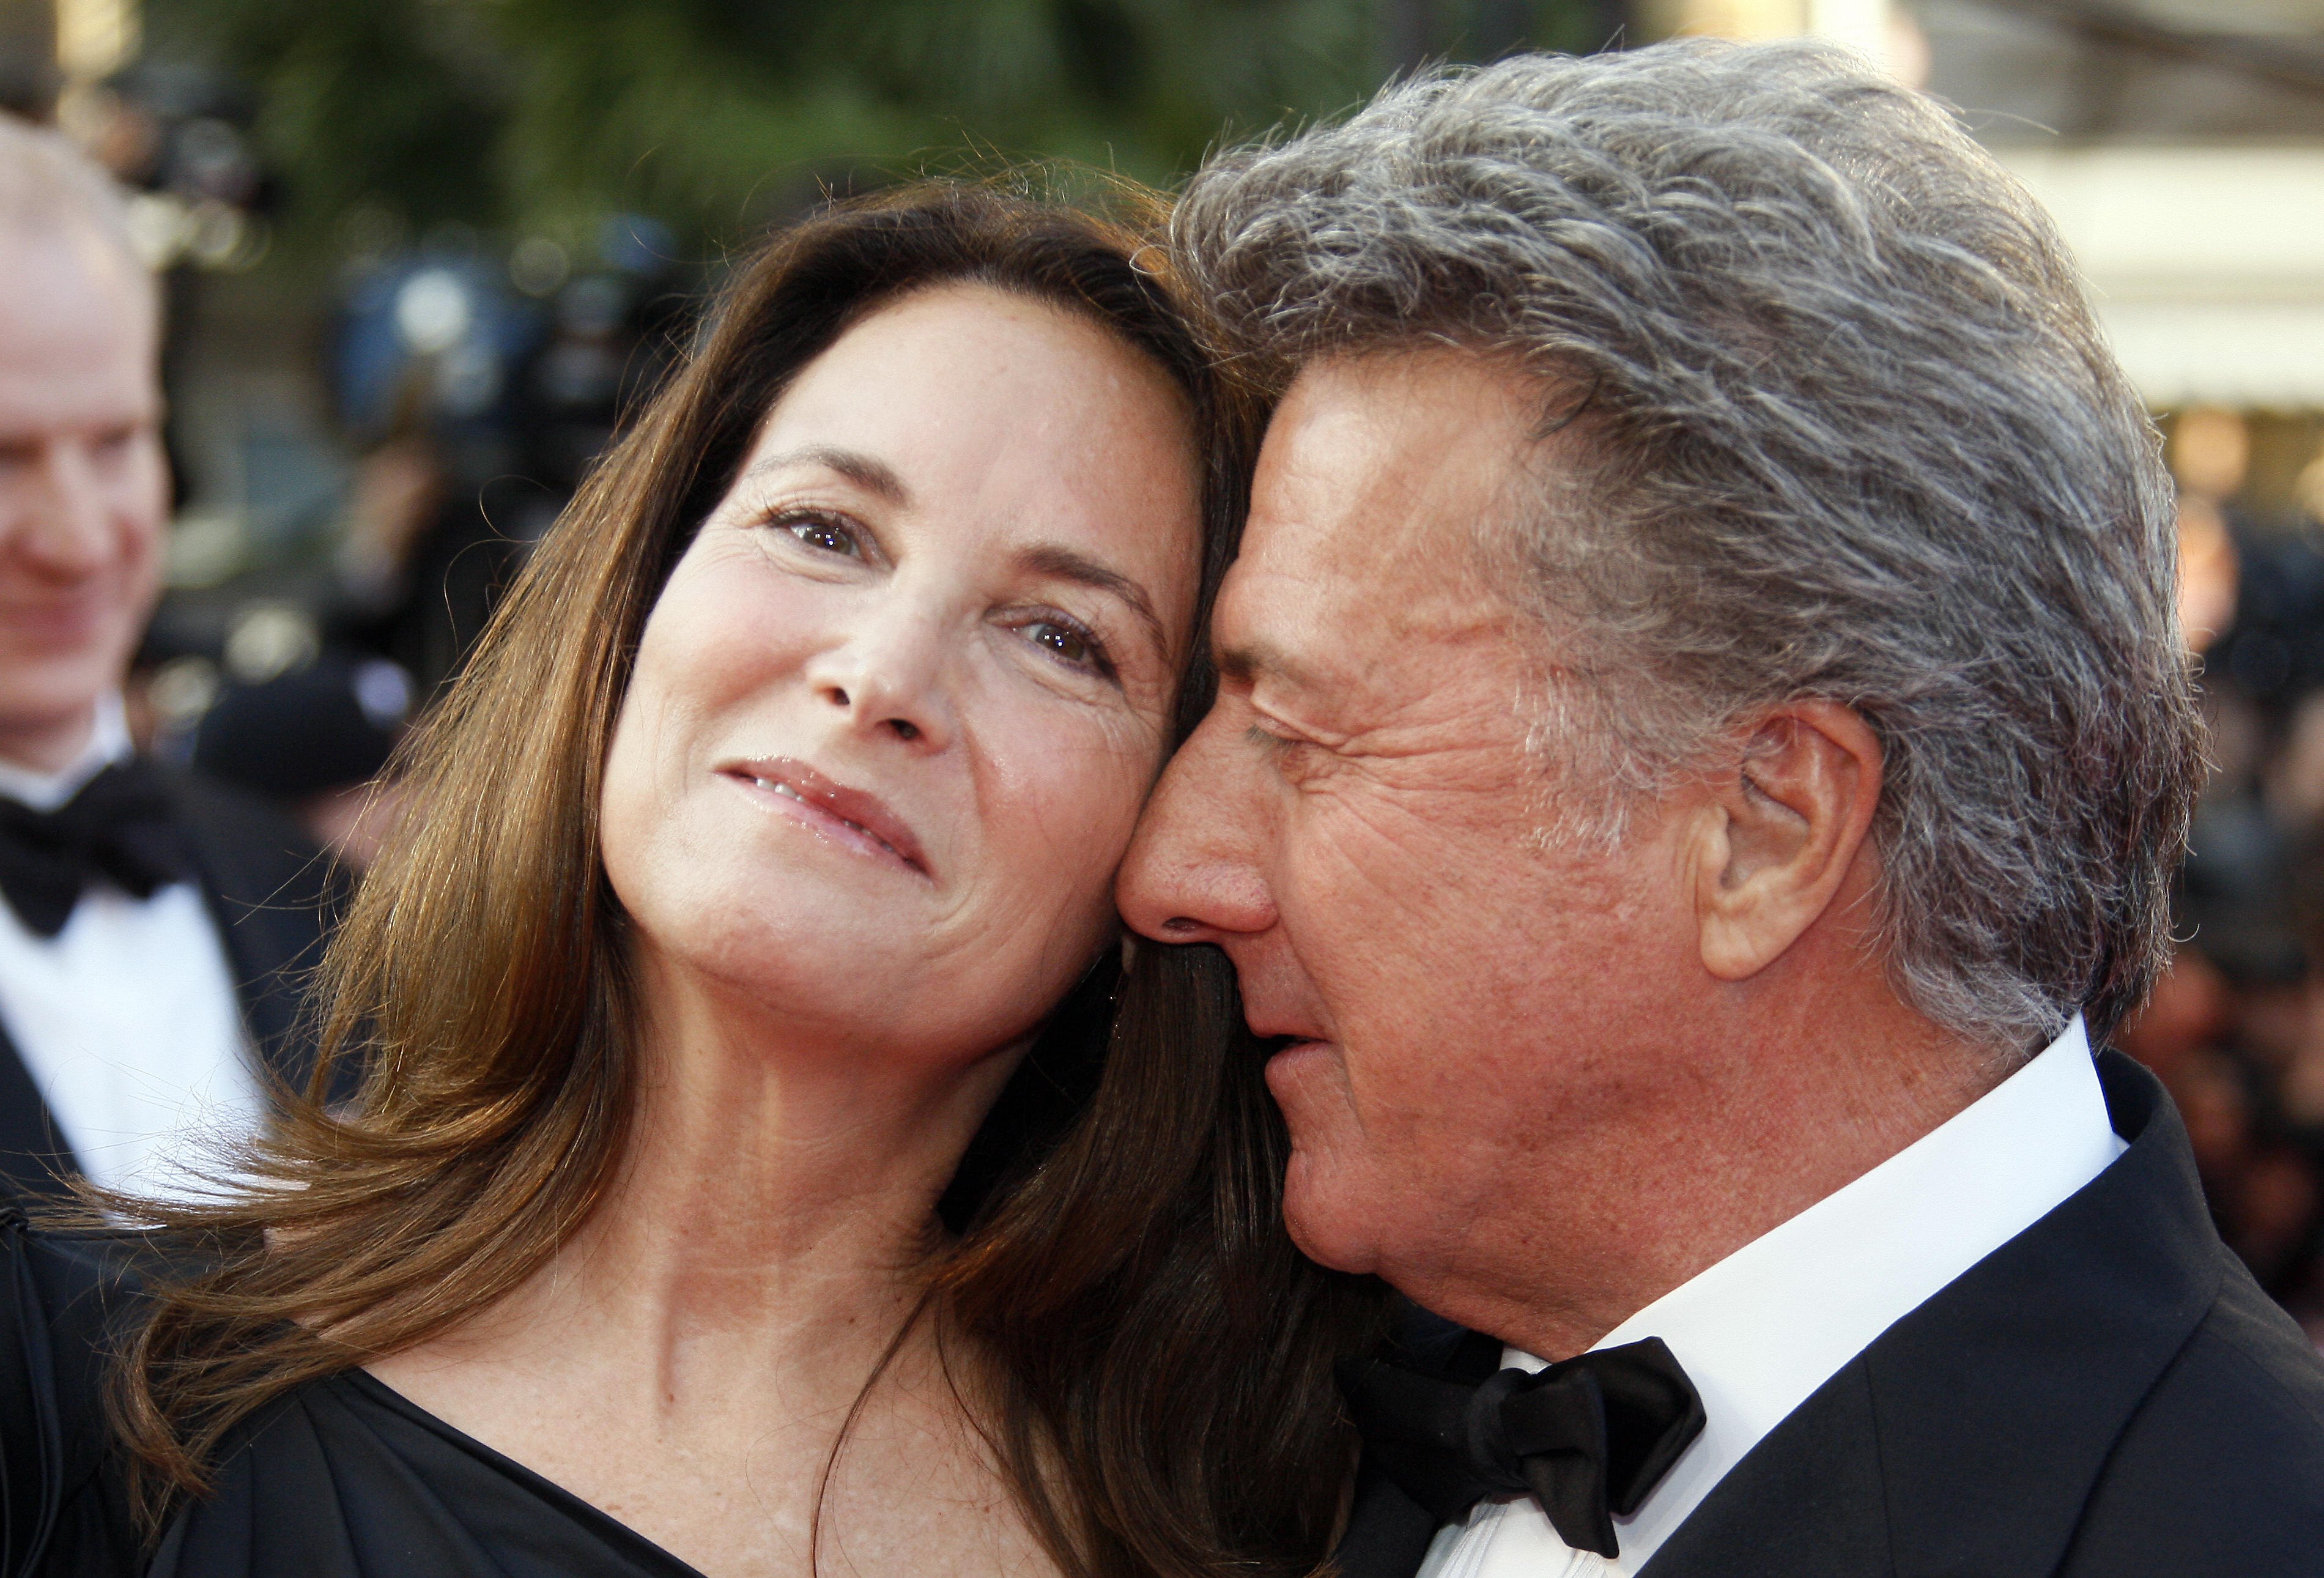 Dustin Hoffman and his wife Lisa Gottsegen pose as they arrive to attend the screening of animated film "Kung Fu Panda" at the 61st Cannes International Film Festival on May 15, 2008 in Cannes, southern France | Photo: Getty Images